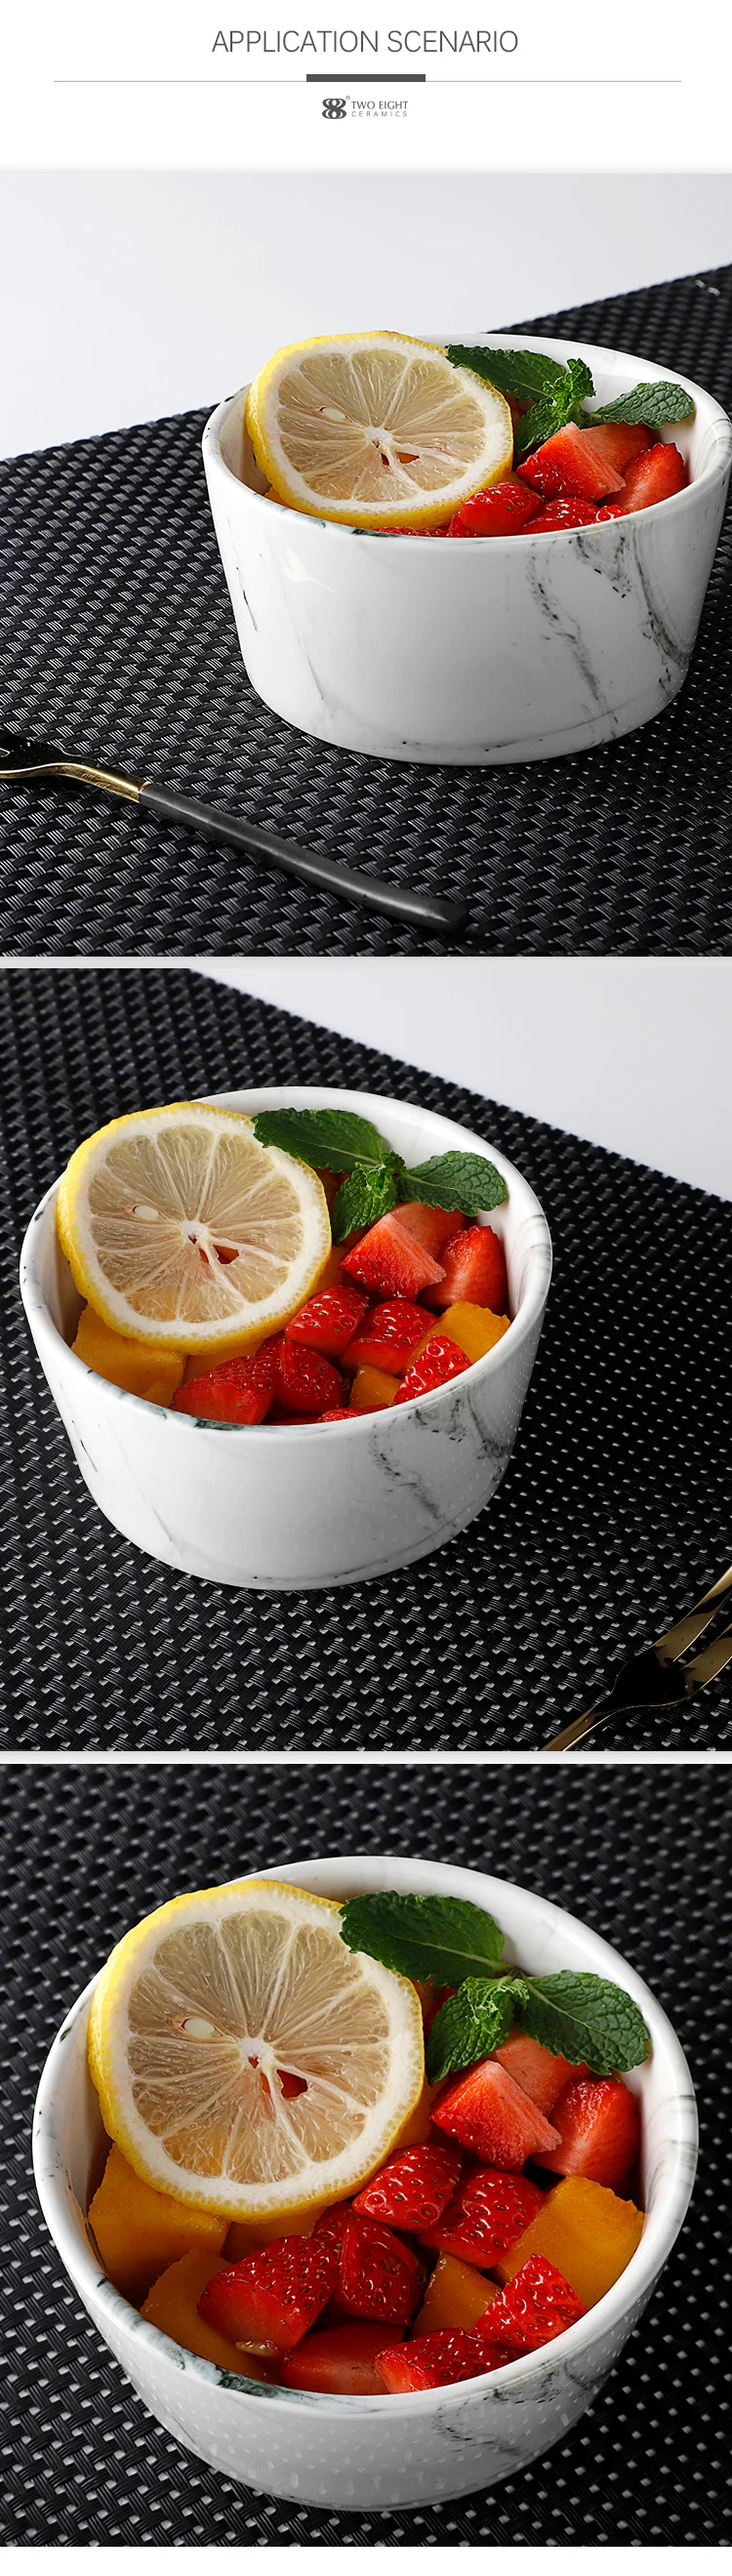 product-Event Party Supplies Marble Salad Bowl, Ceramic Bowl Restaurant, High Quality Serving Bowl 